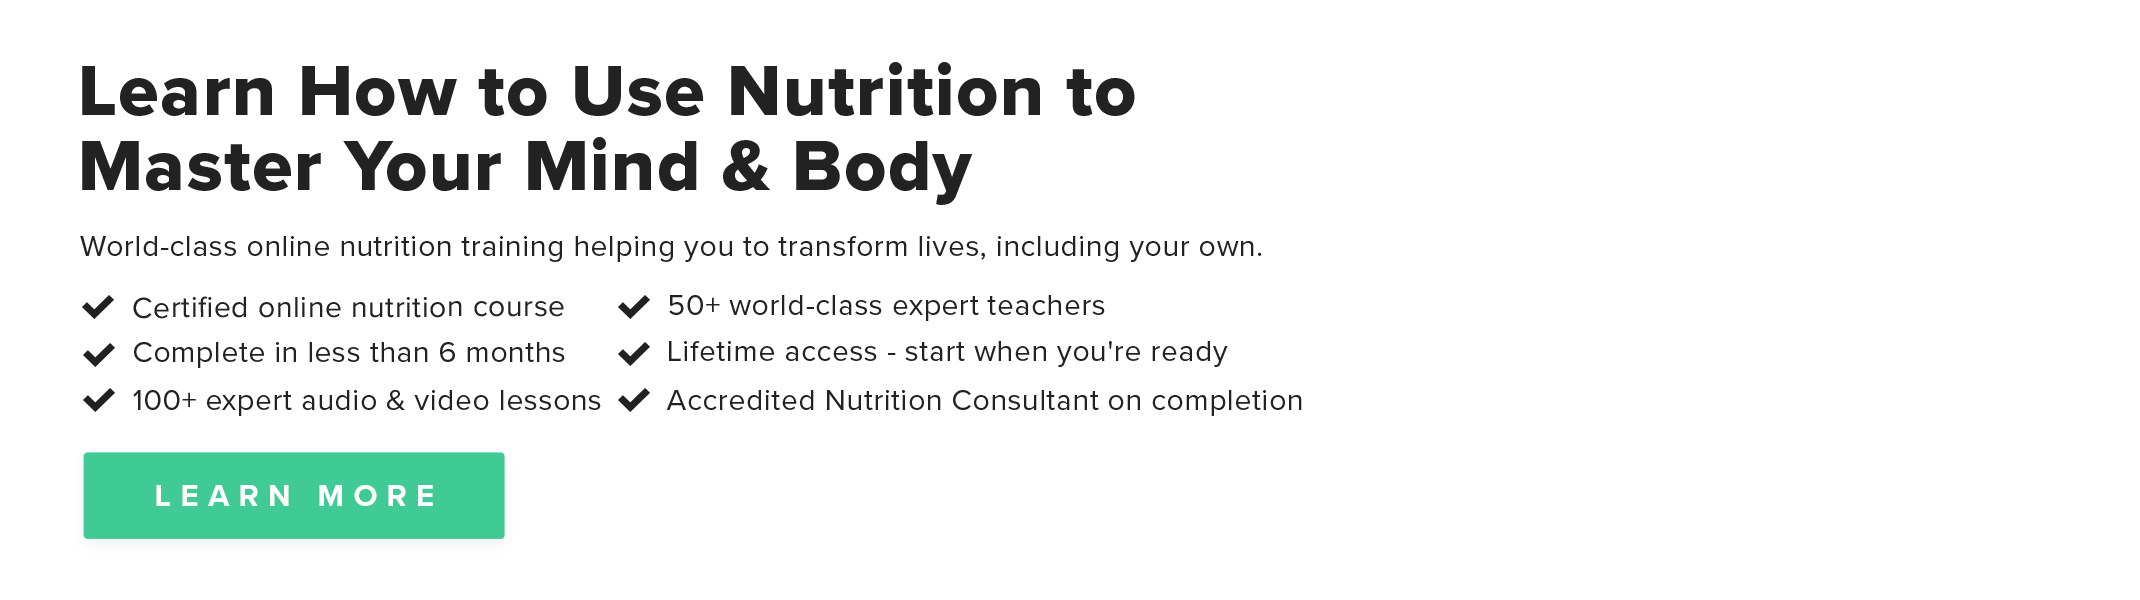 Learn How to Use Nutrition to Master Your Mind & Body